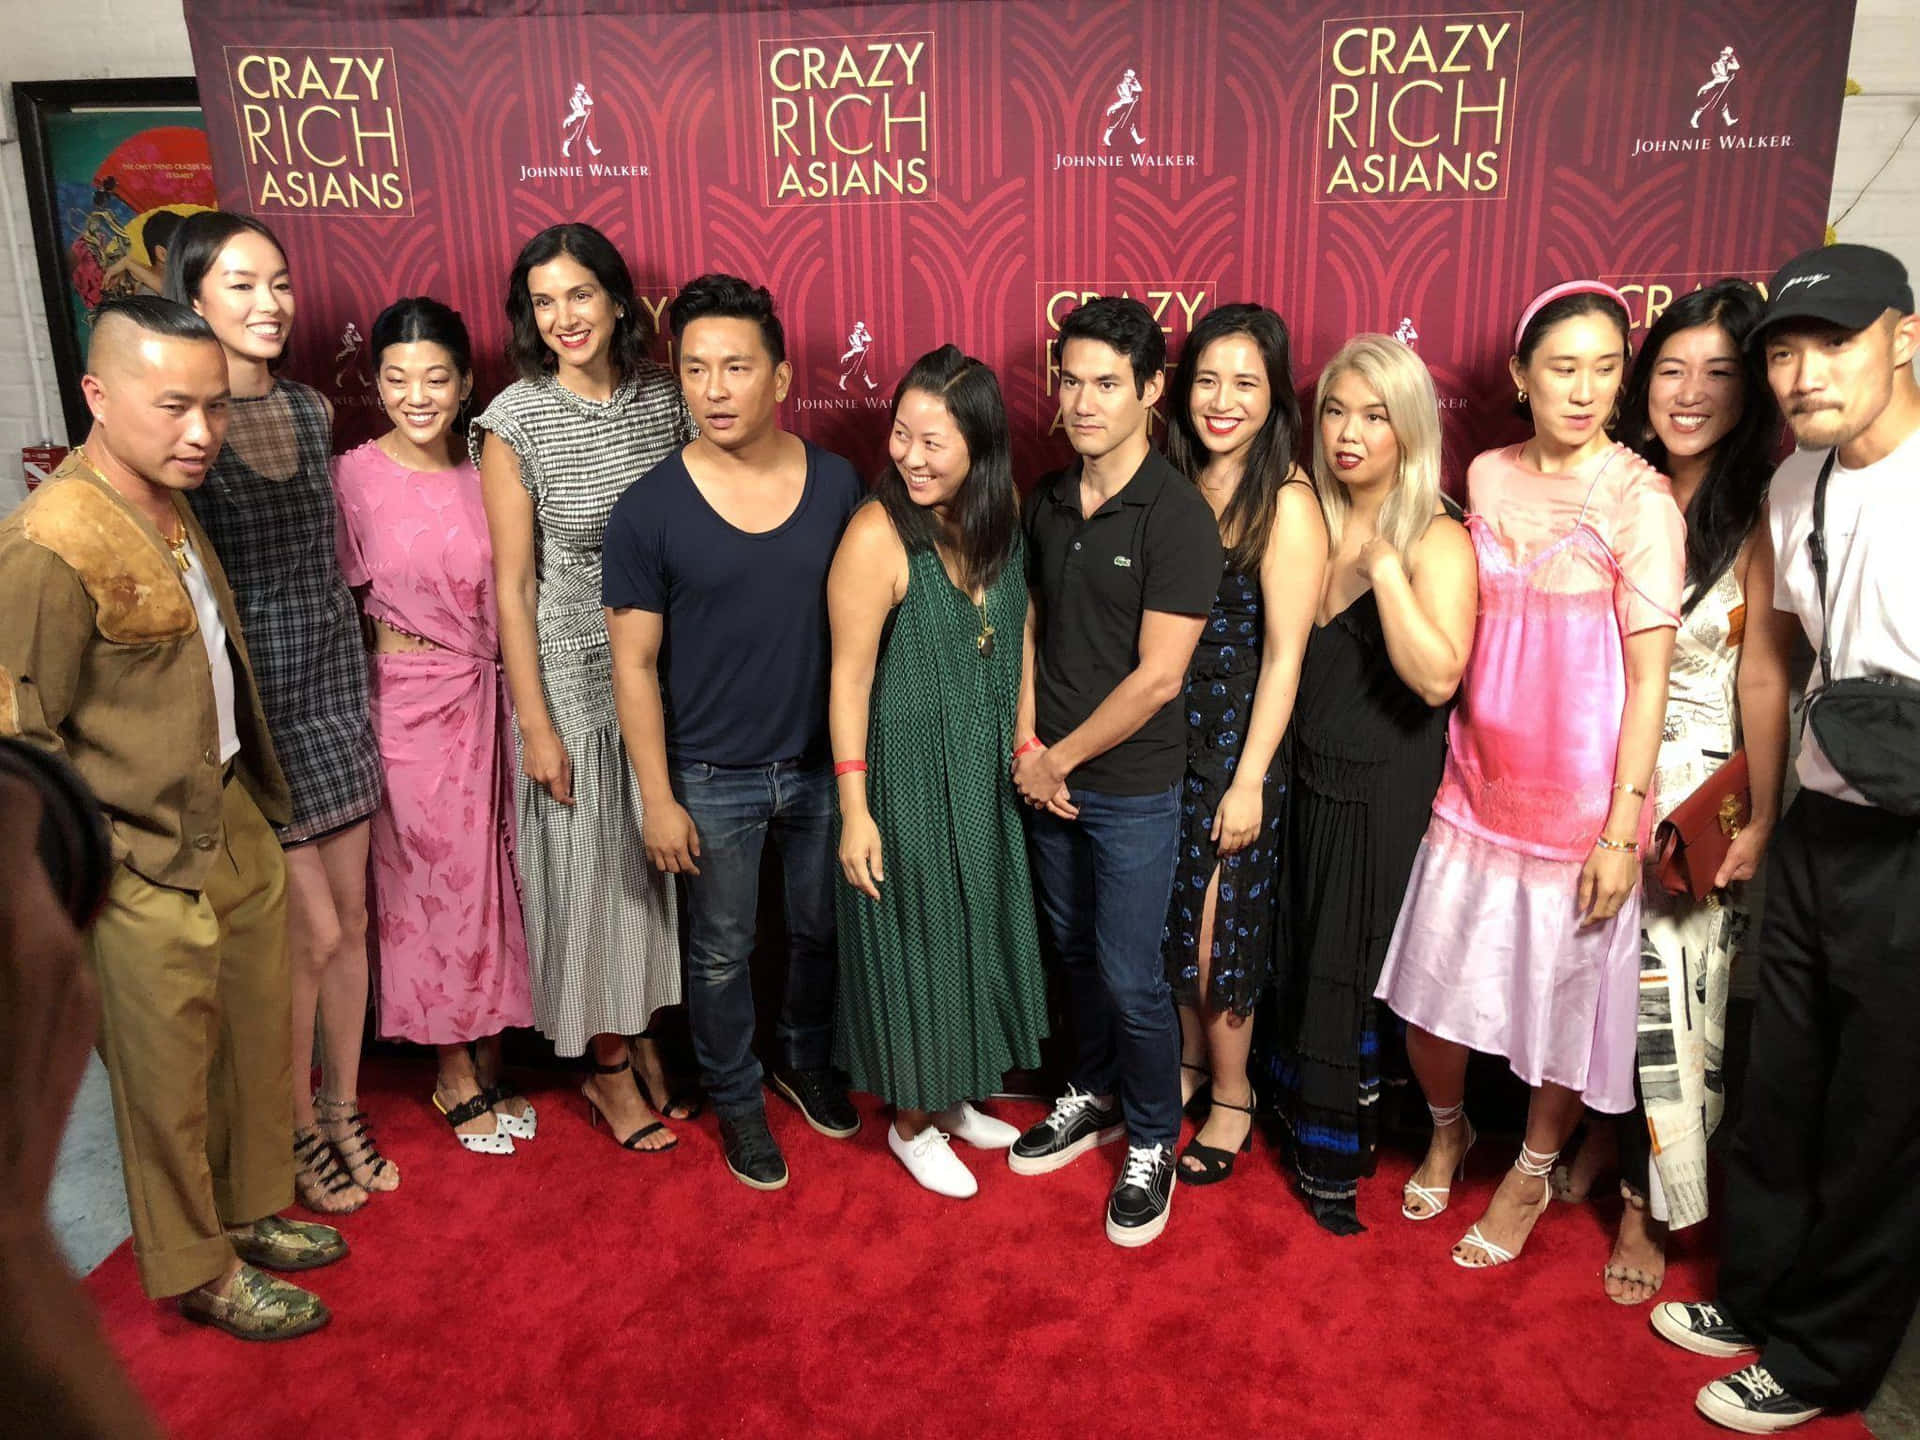 Behind the scenes of Crazy Rich Asians